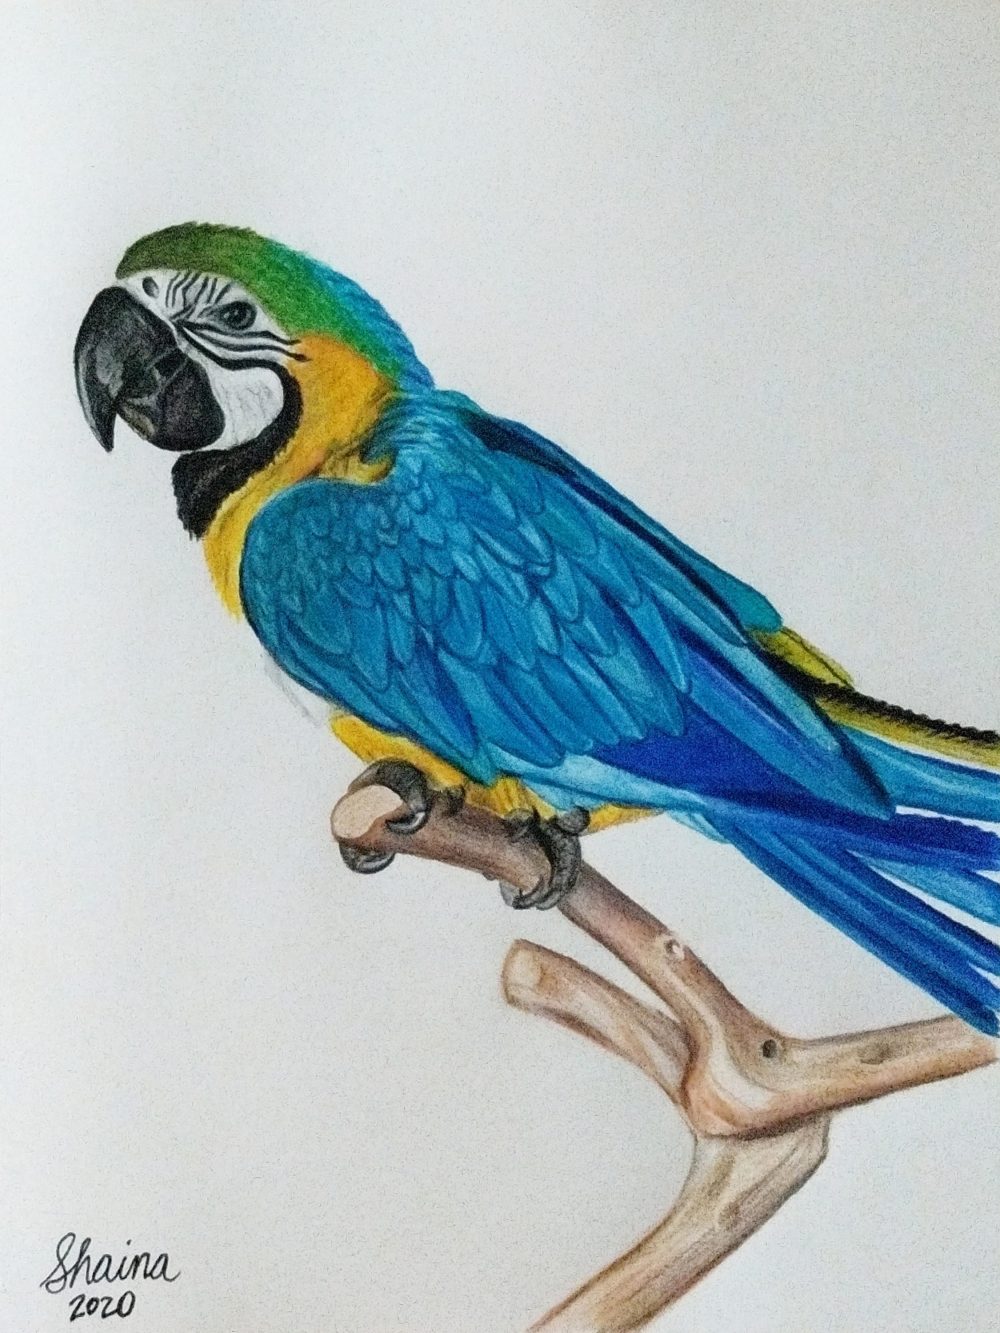 A colored pencil portrait of a blue-and-gold macaw perched on a small stick, with the macaw facing away from the viewer with its head turned over its shoulder toward the viewer.